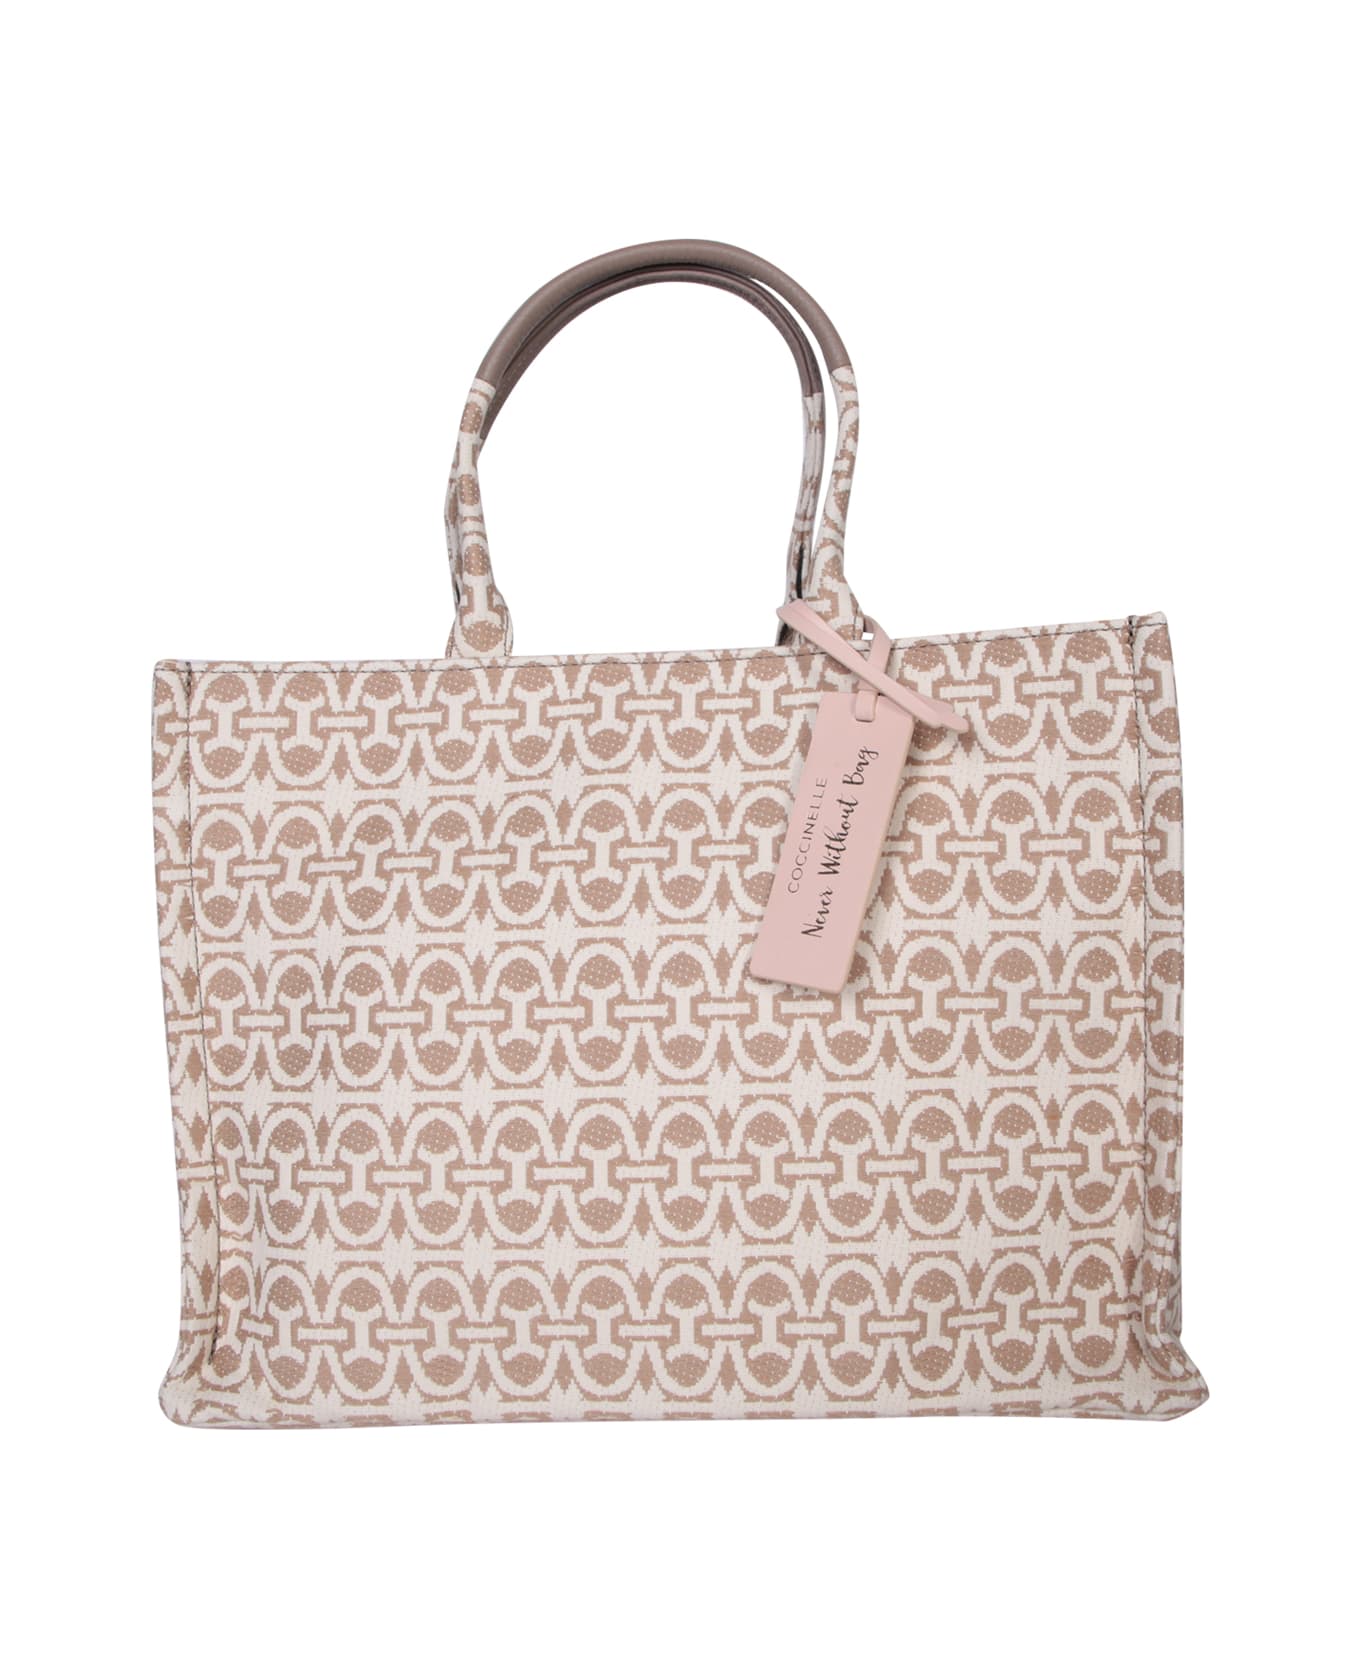 Coccinelle Beige And White Tote Bag - Beige トートバッグ